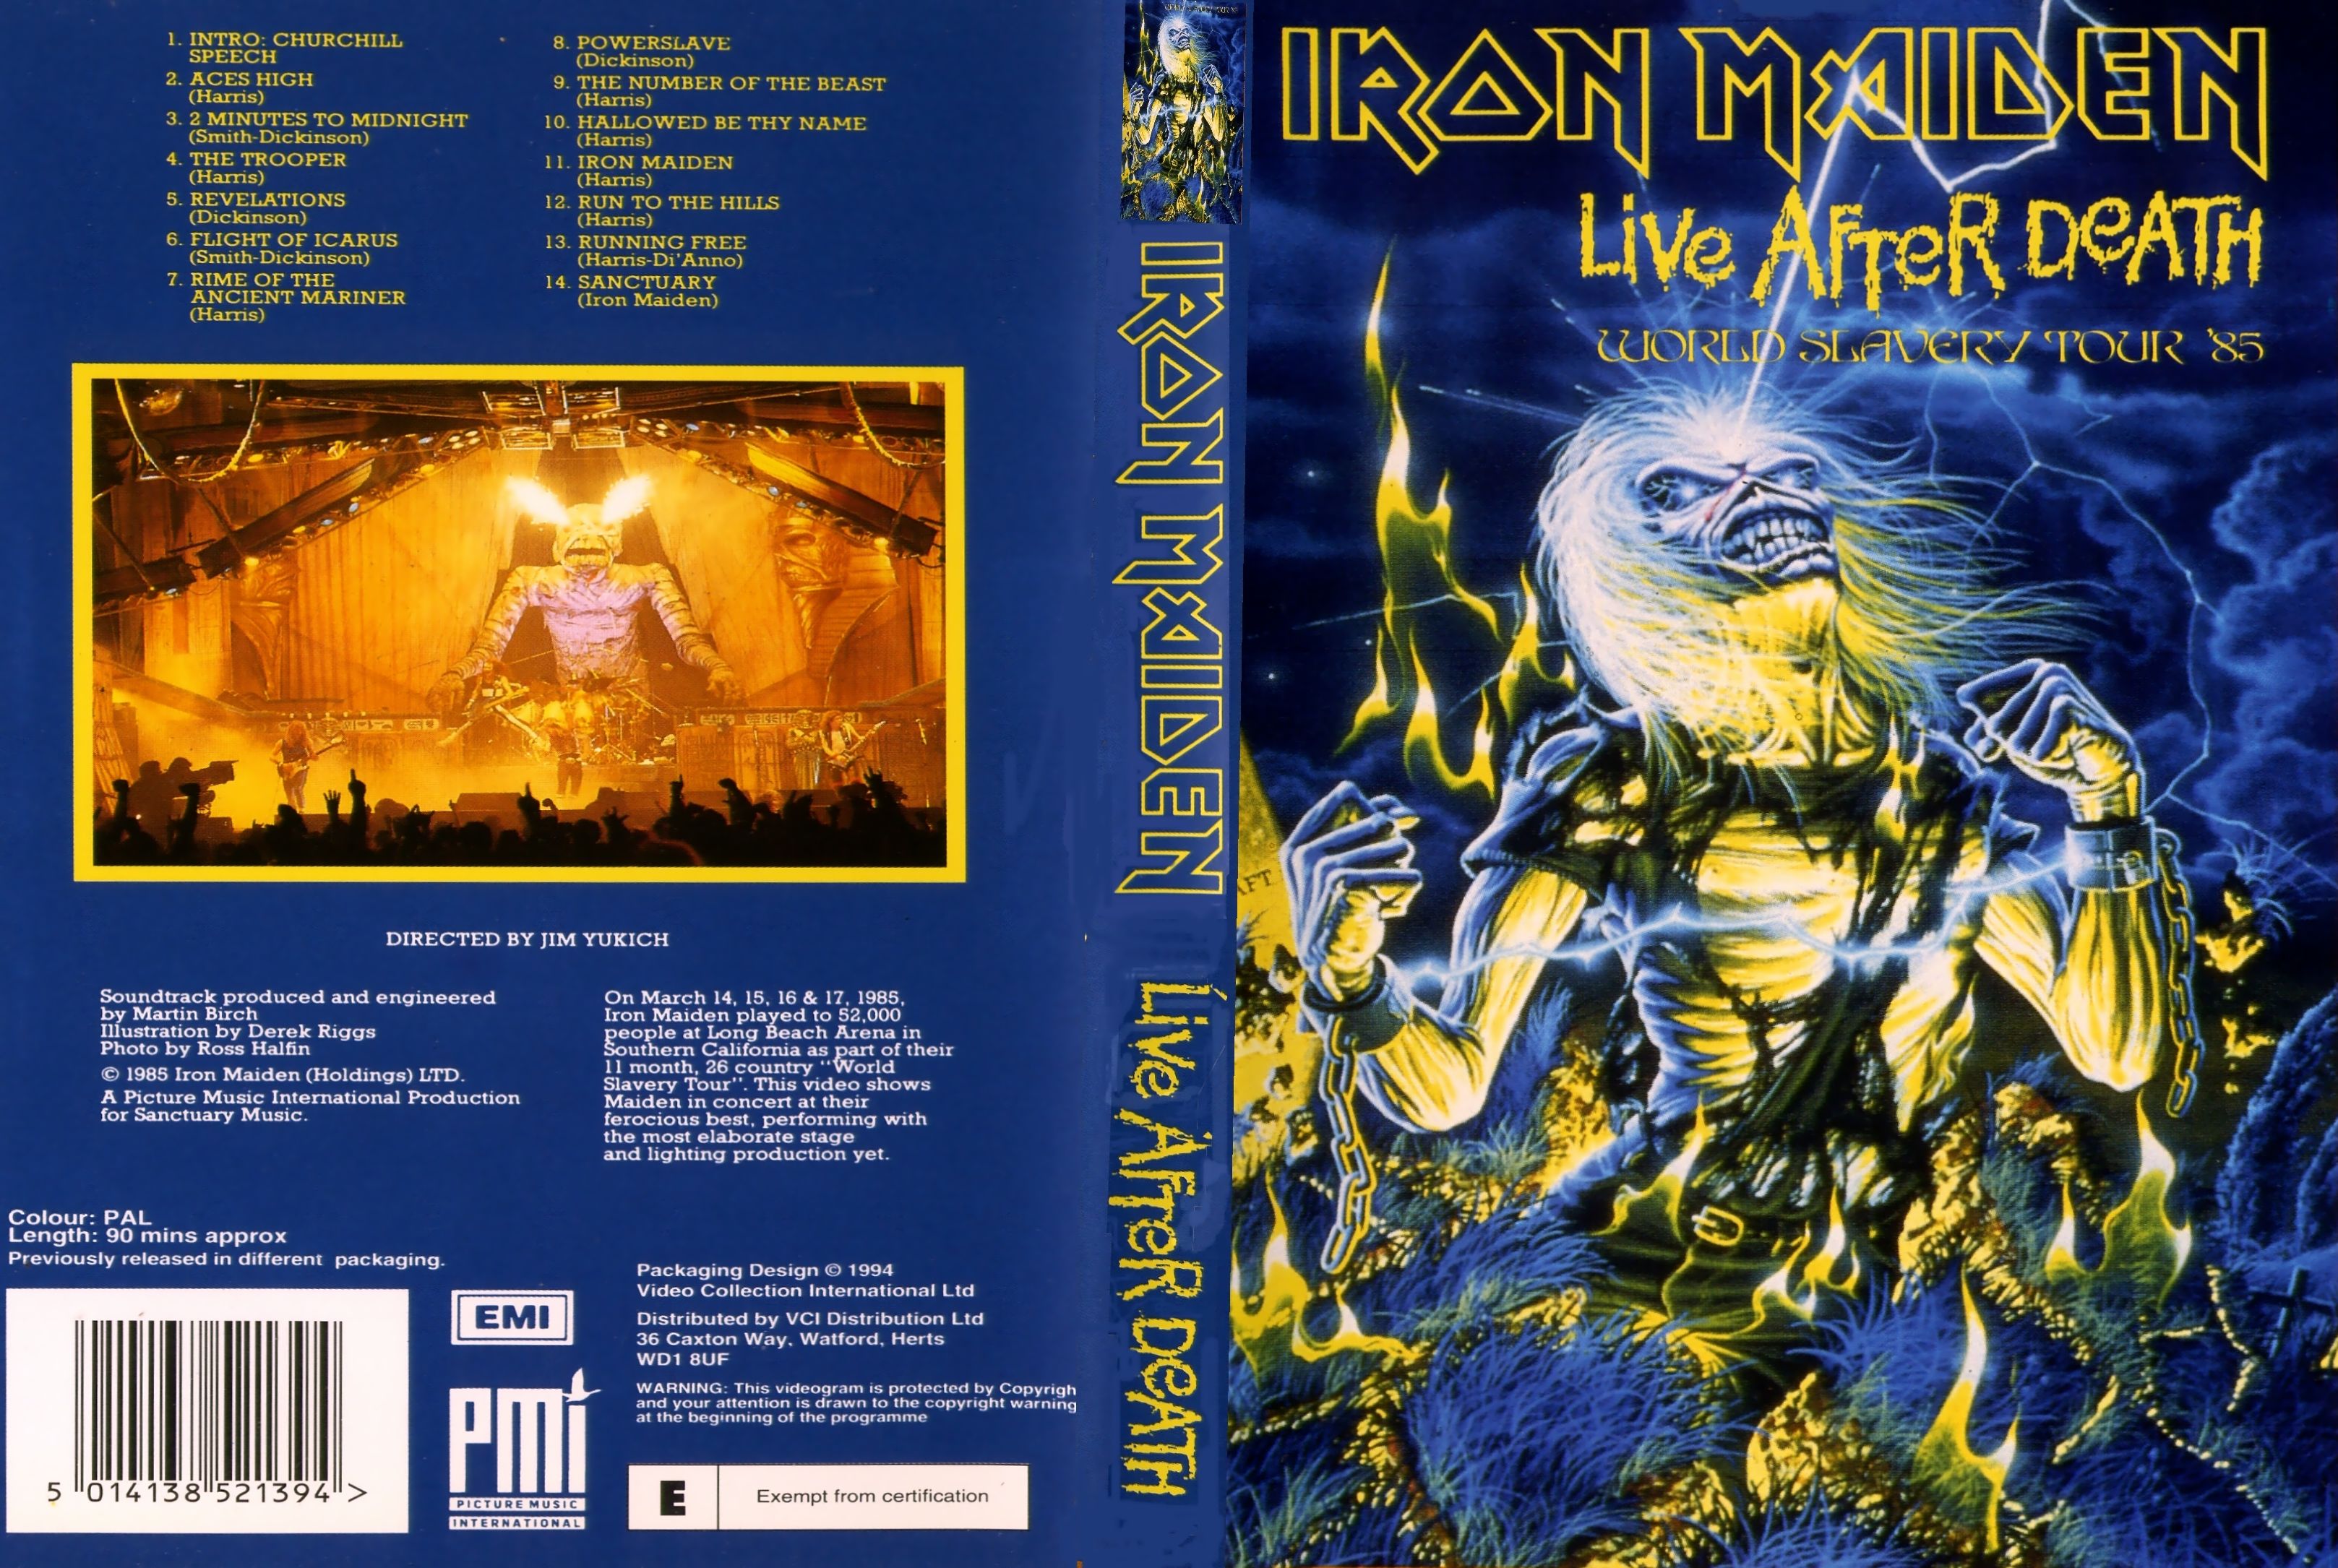 Jaquette DVD Iron Maiden - live after death